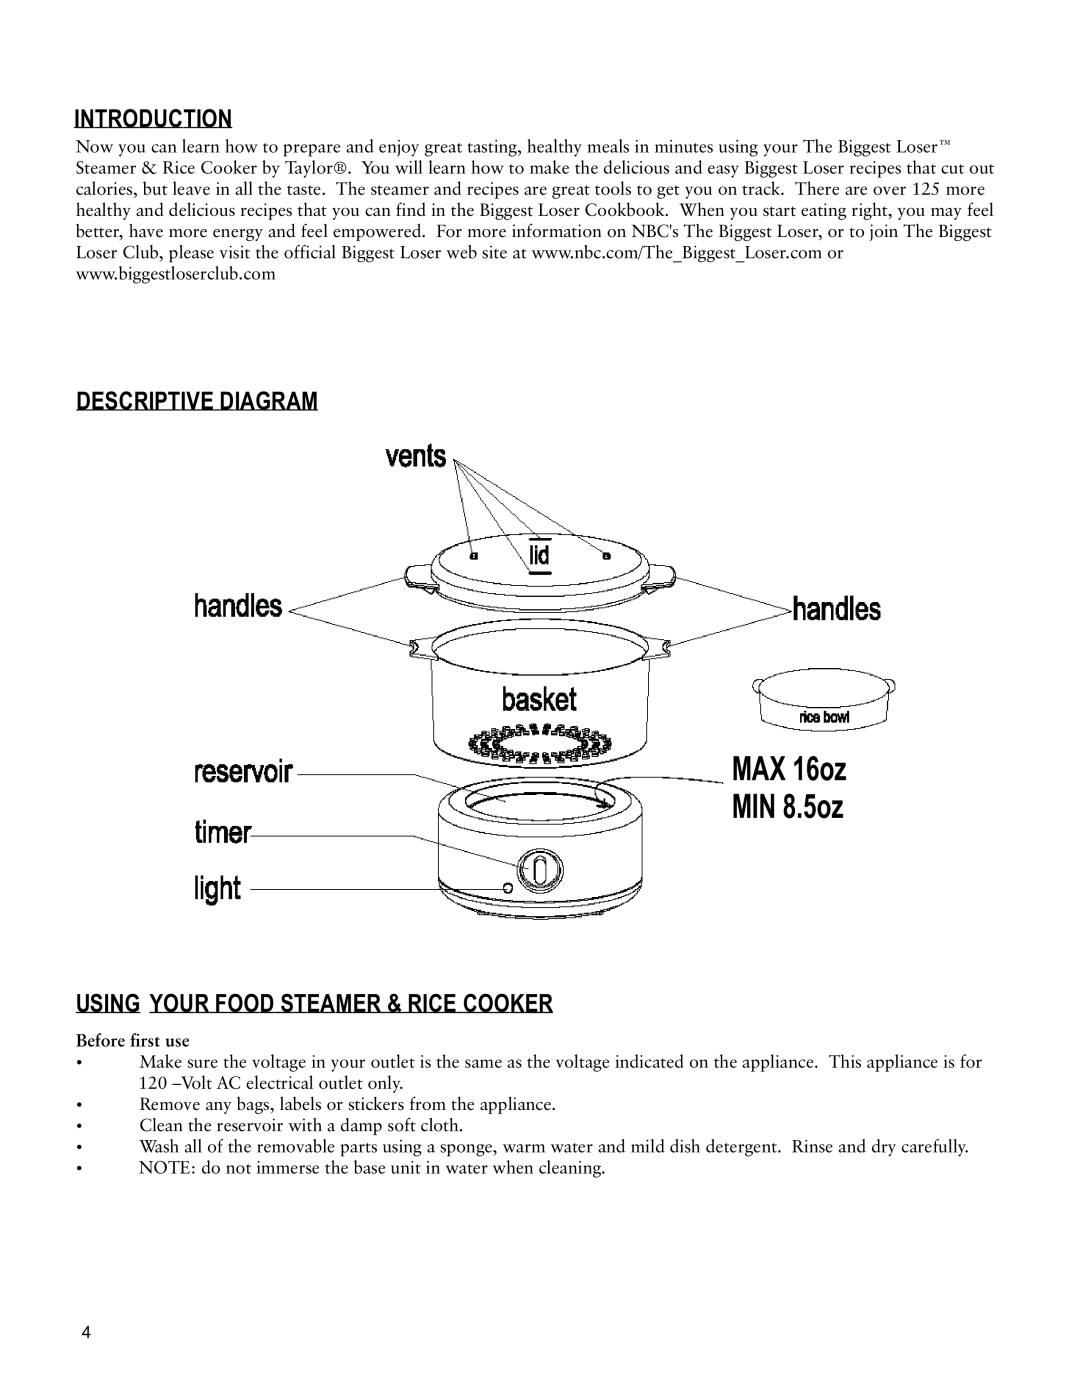 Taylor AS-1550-BL Introduction, Descriptive Diagram, Using Your Food Steamer & Rice Cooker, MAX 16oz MIN 8.5oz 